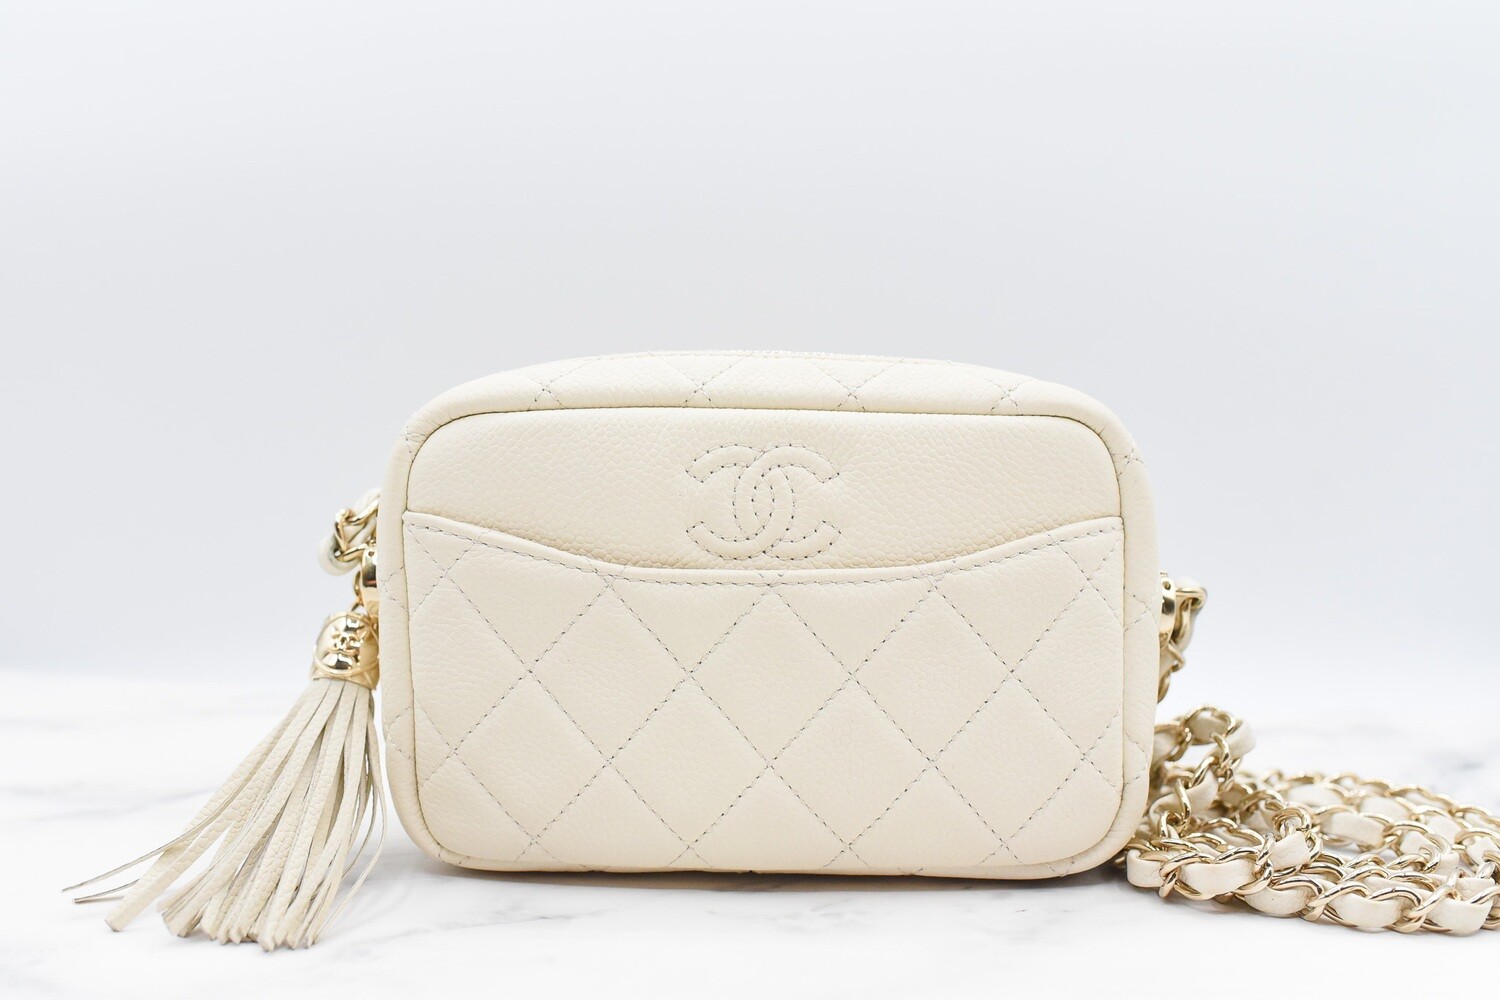 Chanel Coco First Flap Bag, Beige Caviar Leather With Gold Hardware,  Preowned In Dustbag WA001